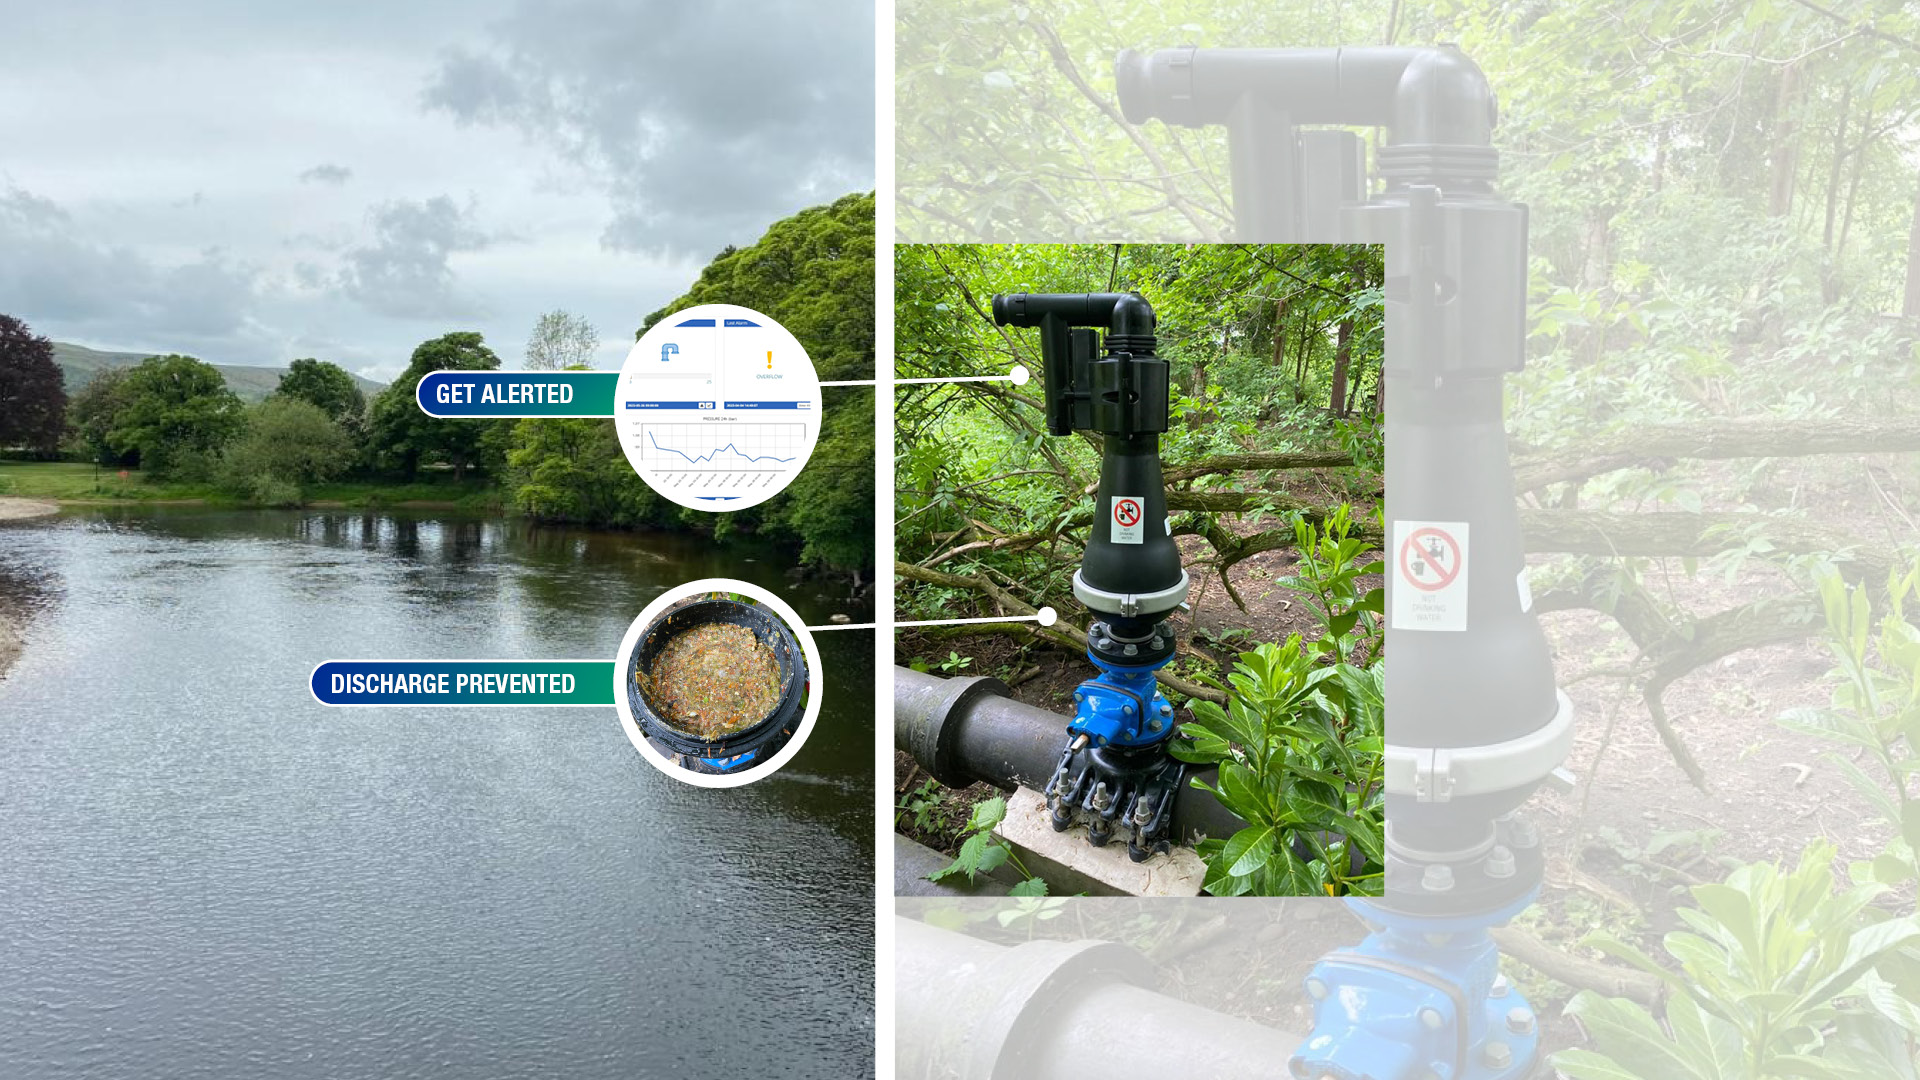 Smart Solution to River pollution using air valves with sensors that raise the alarm